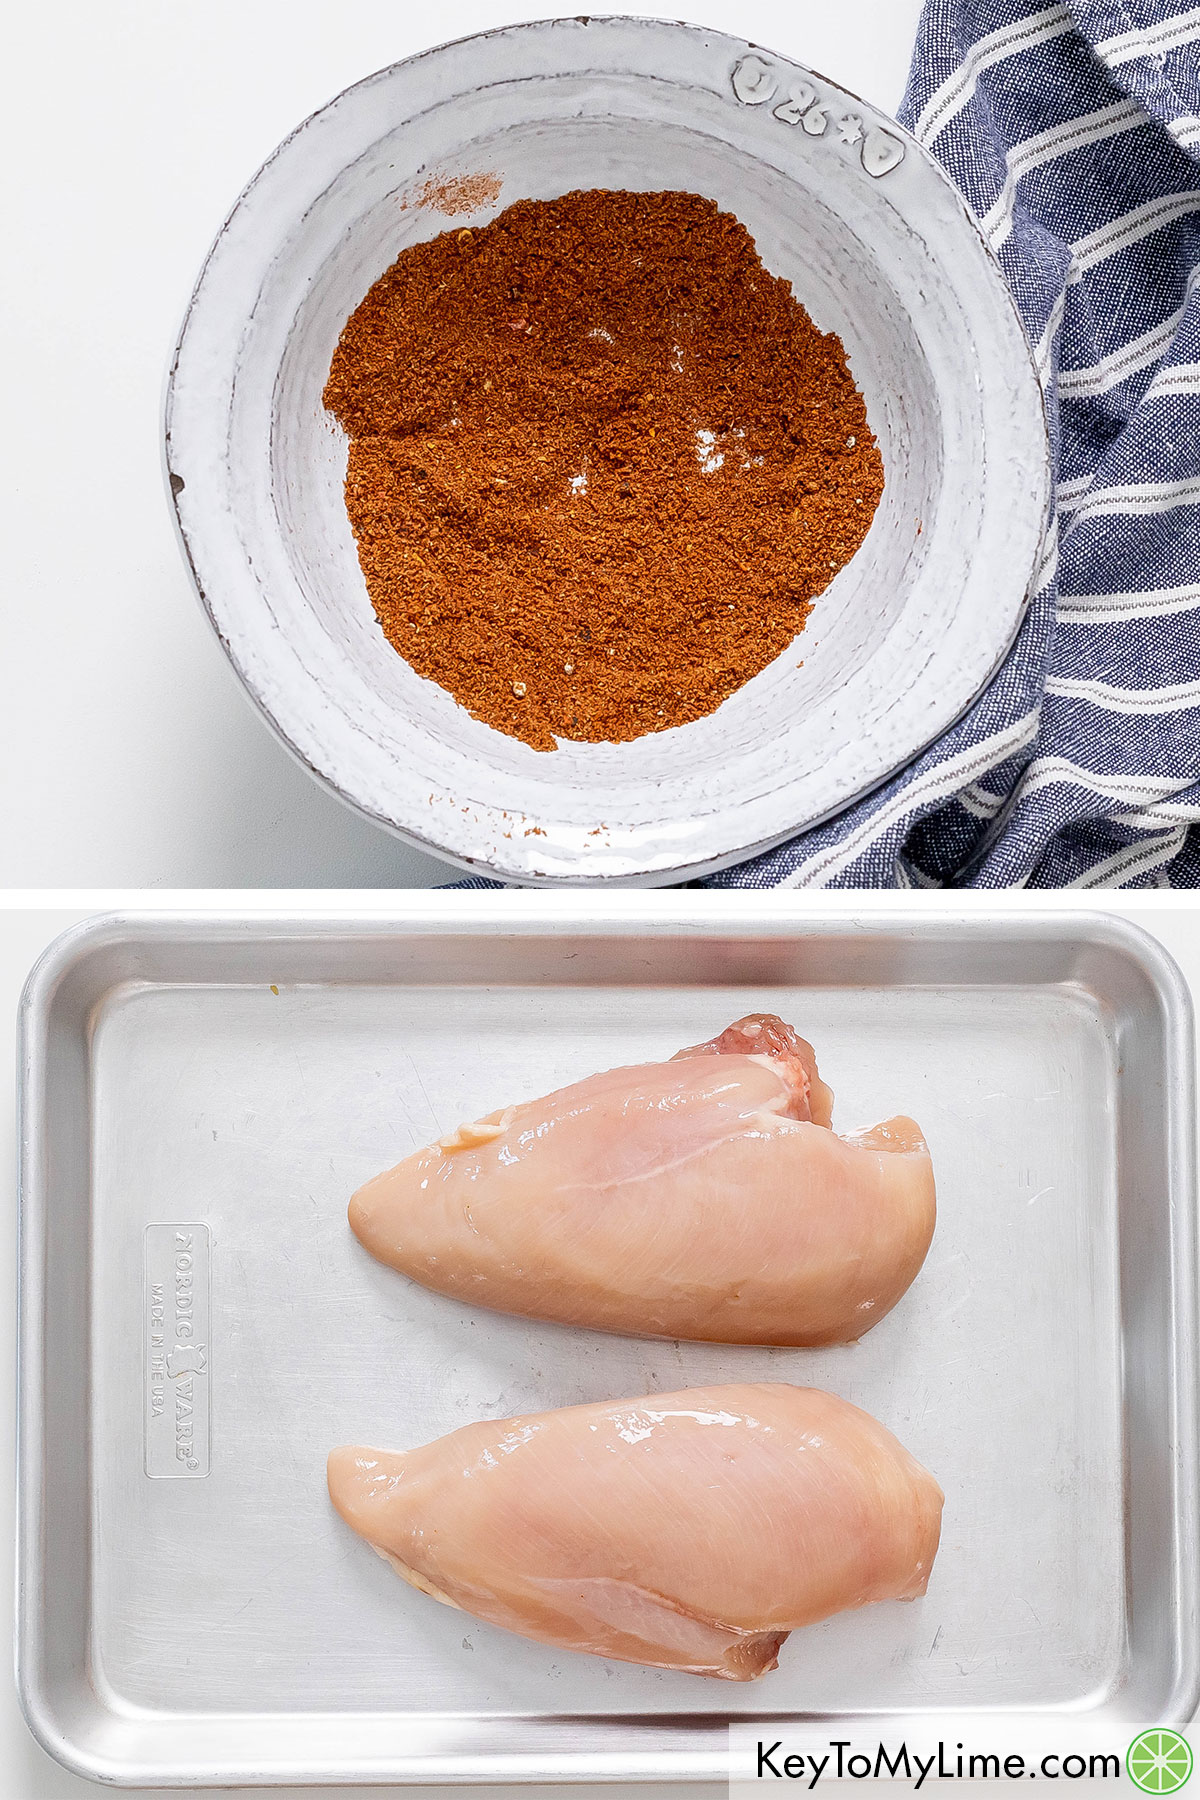 An image of mixed seasoning in a bowl and two chicken breasts on a tray.